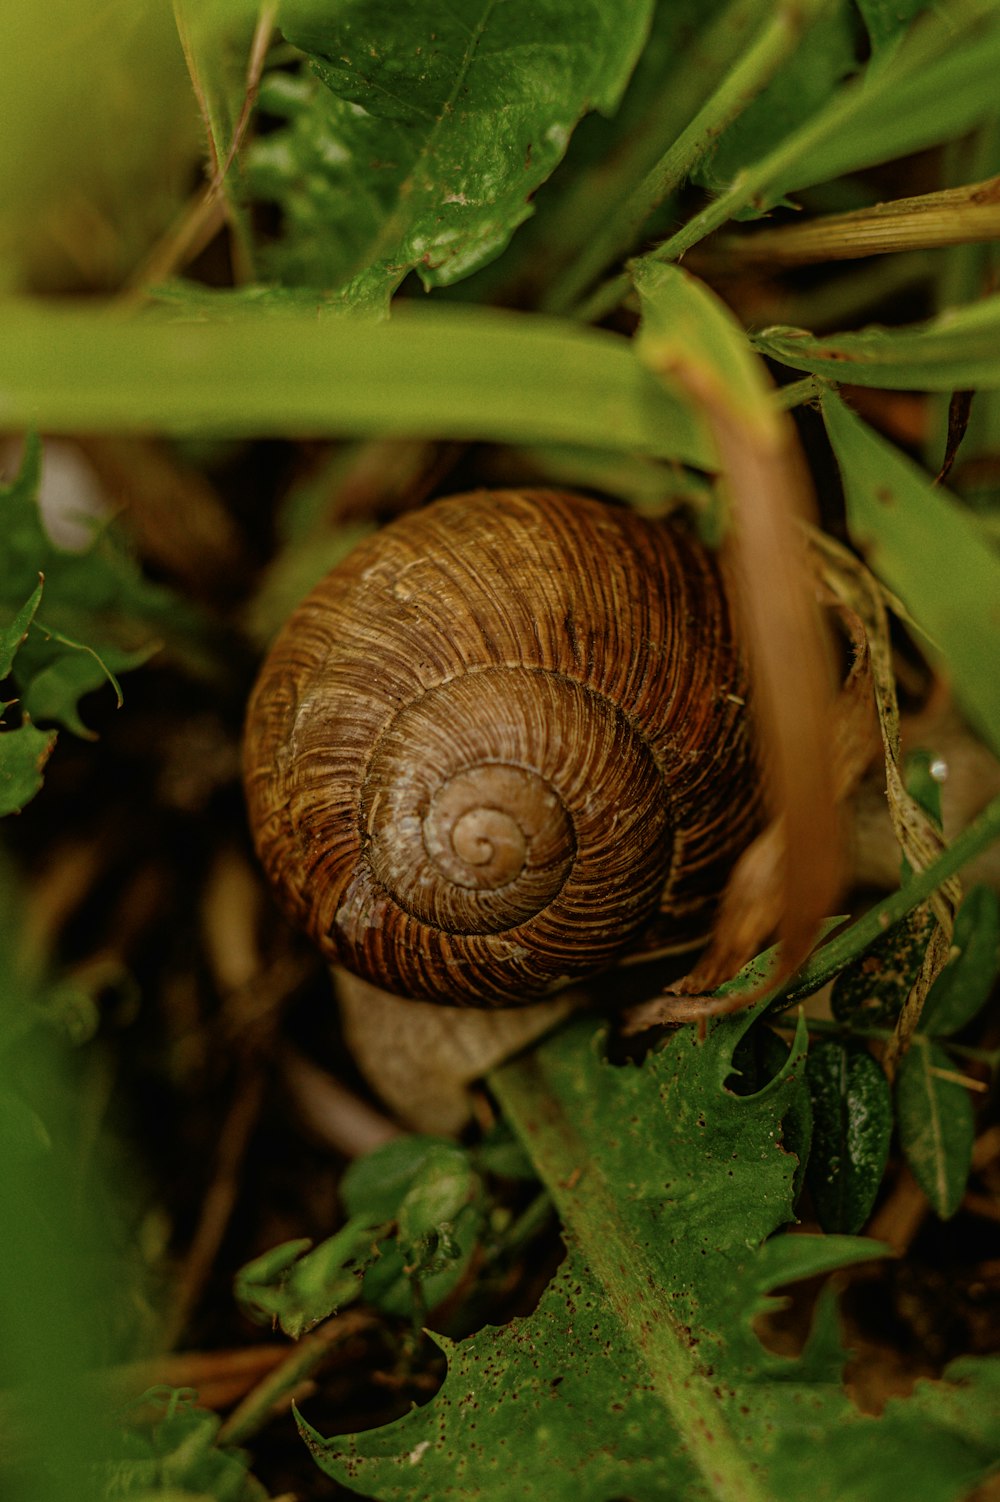 a close up of a snail on a leafy plant